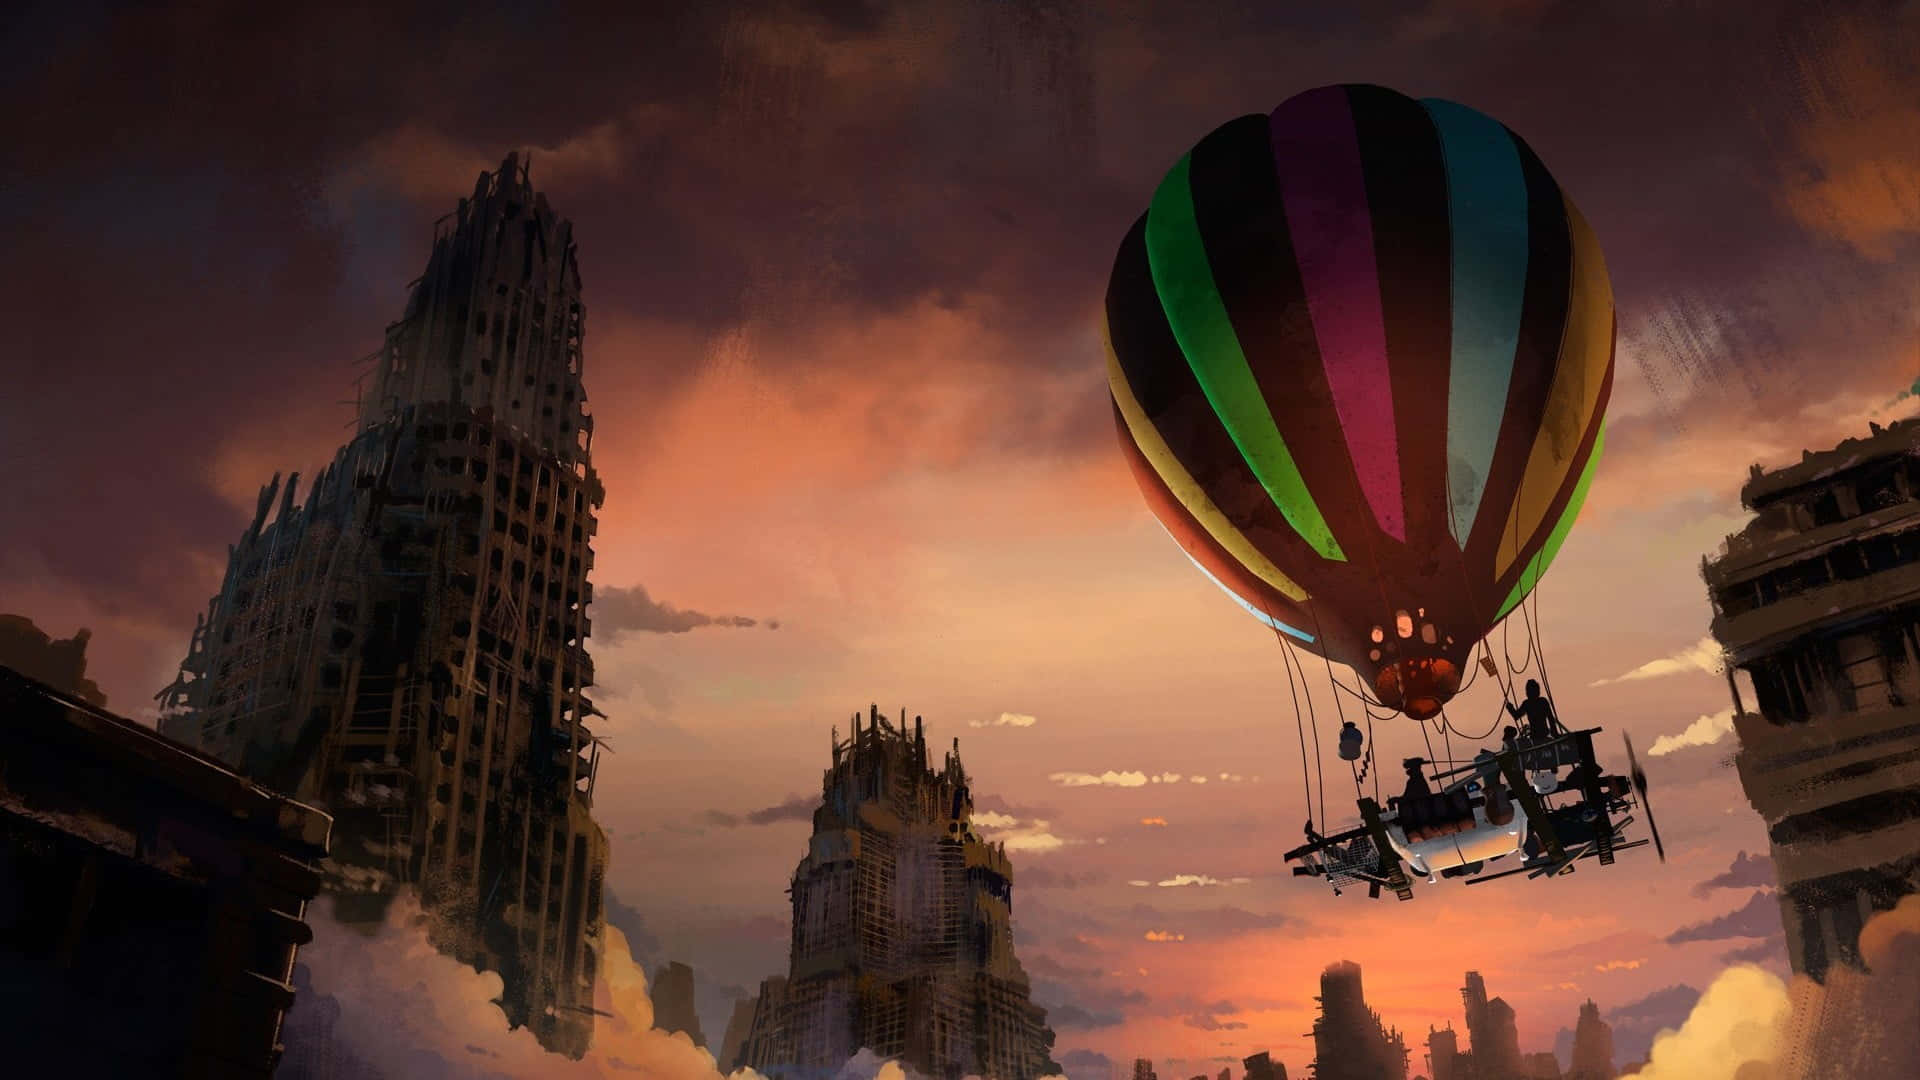 Soar high in the sky with a Hot Air Balloon